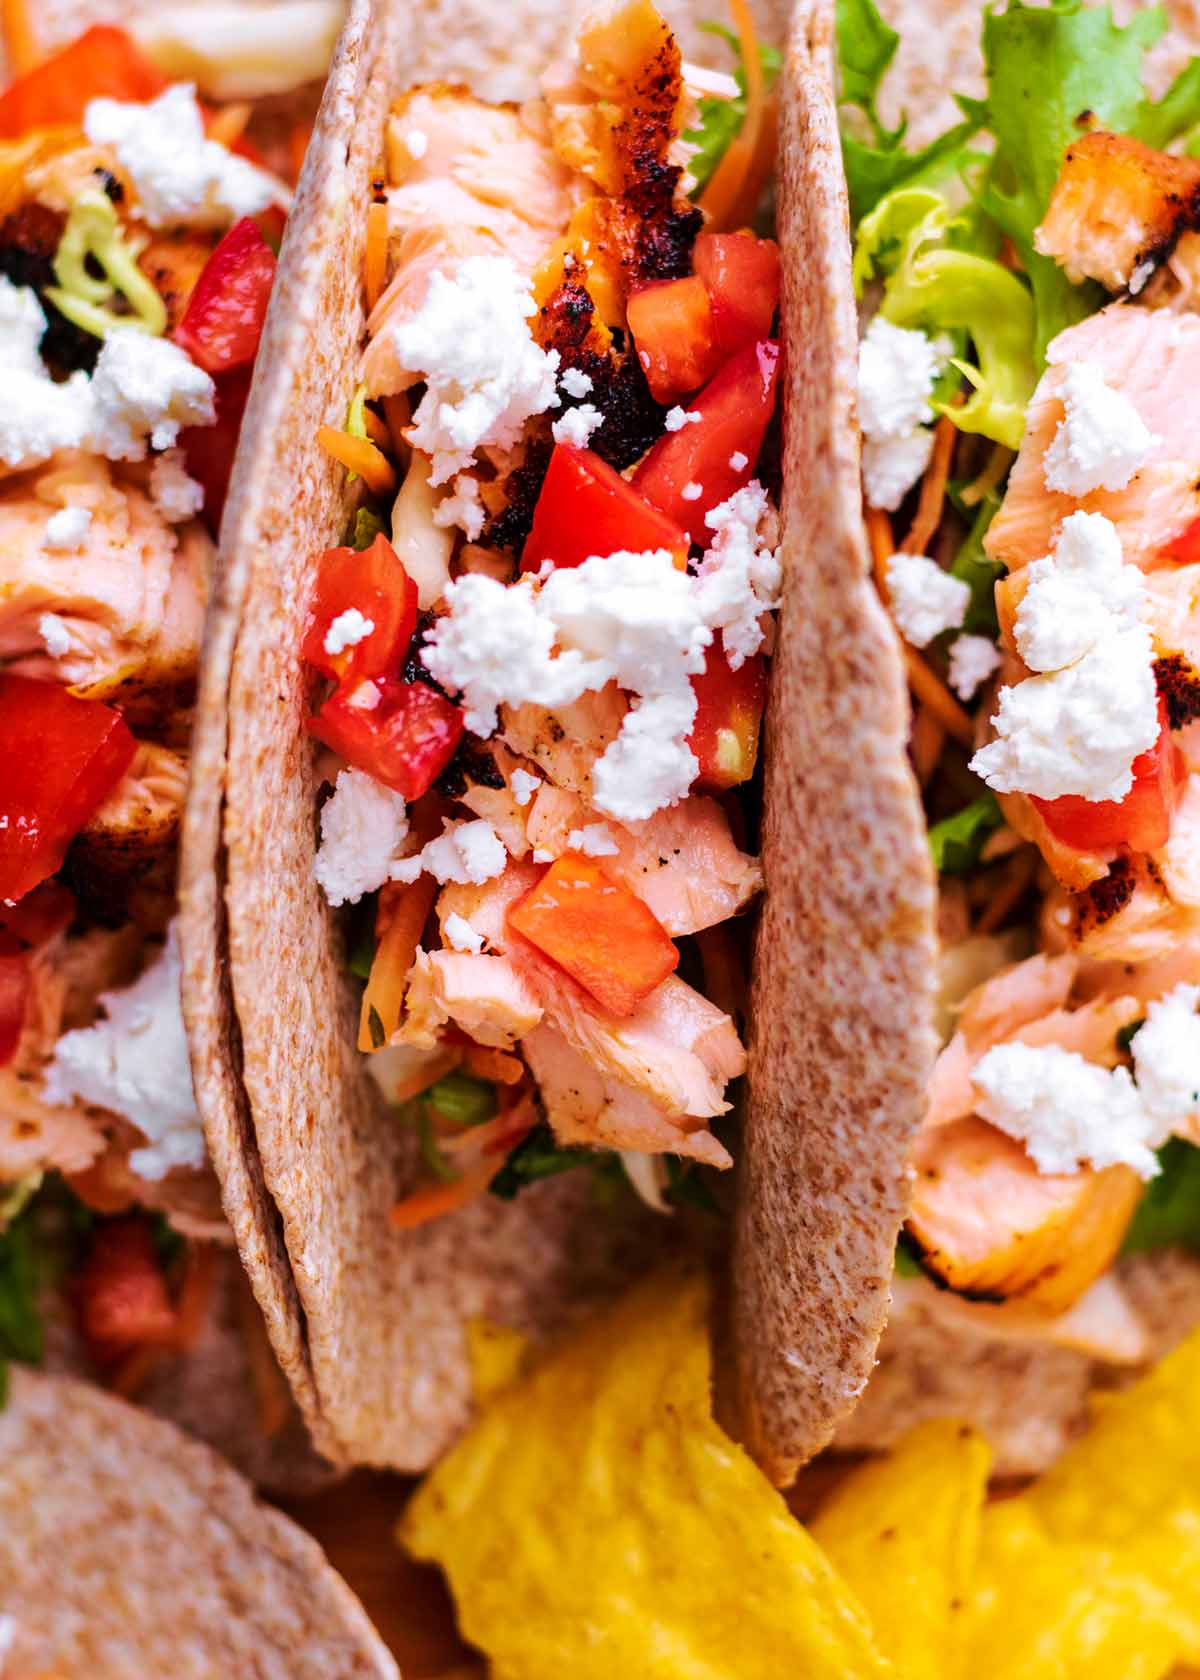 Folded tacos containing salad, salmon and feta cheese.